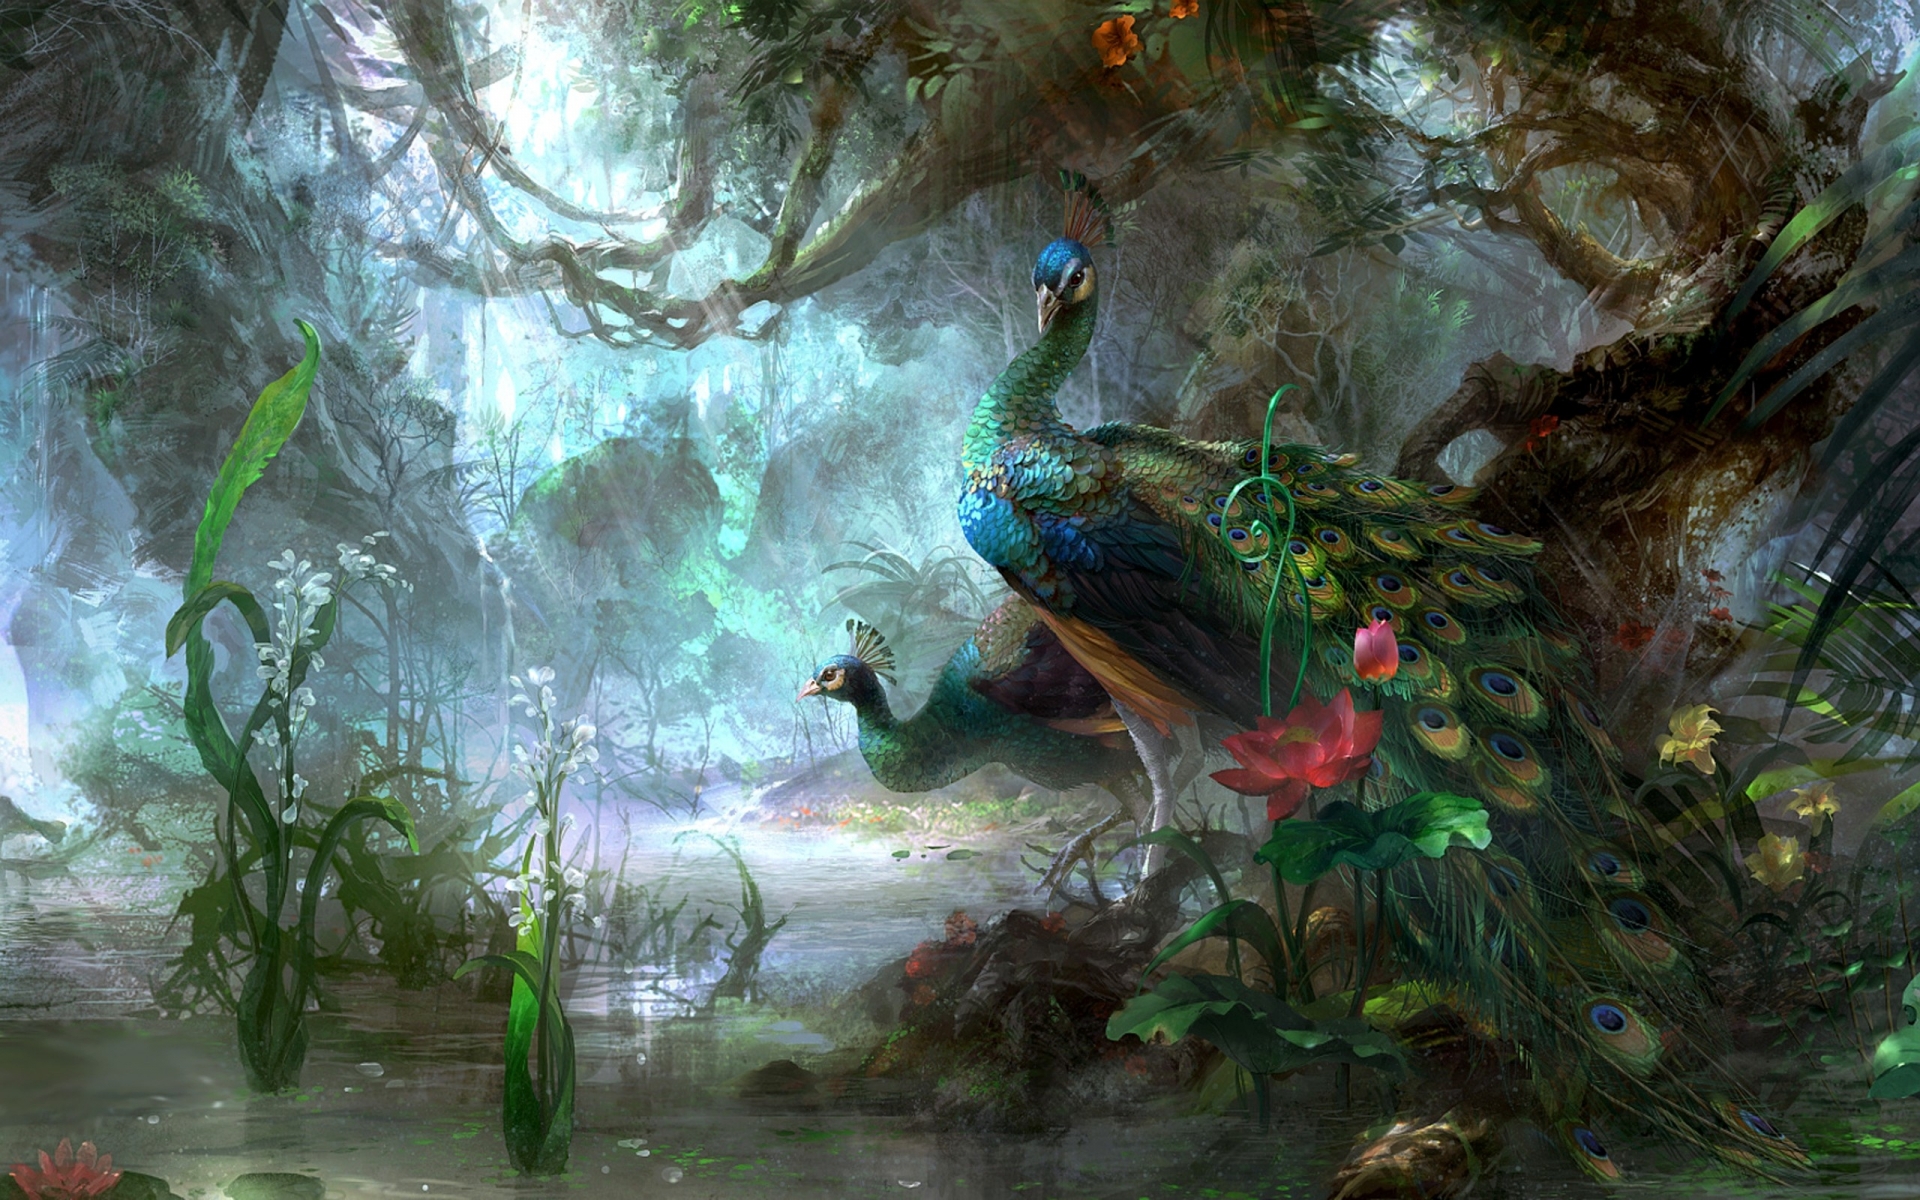  animals magical peacock jungle lake pond water moss flowers wallpaper